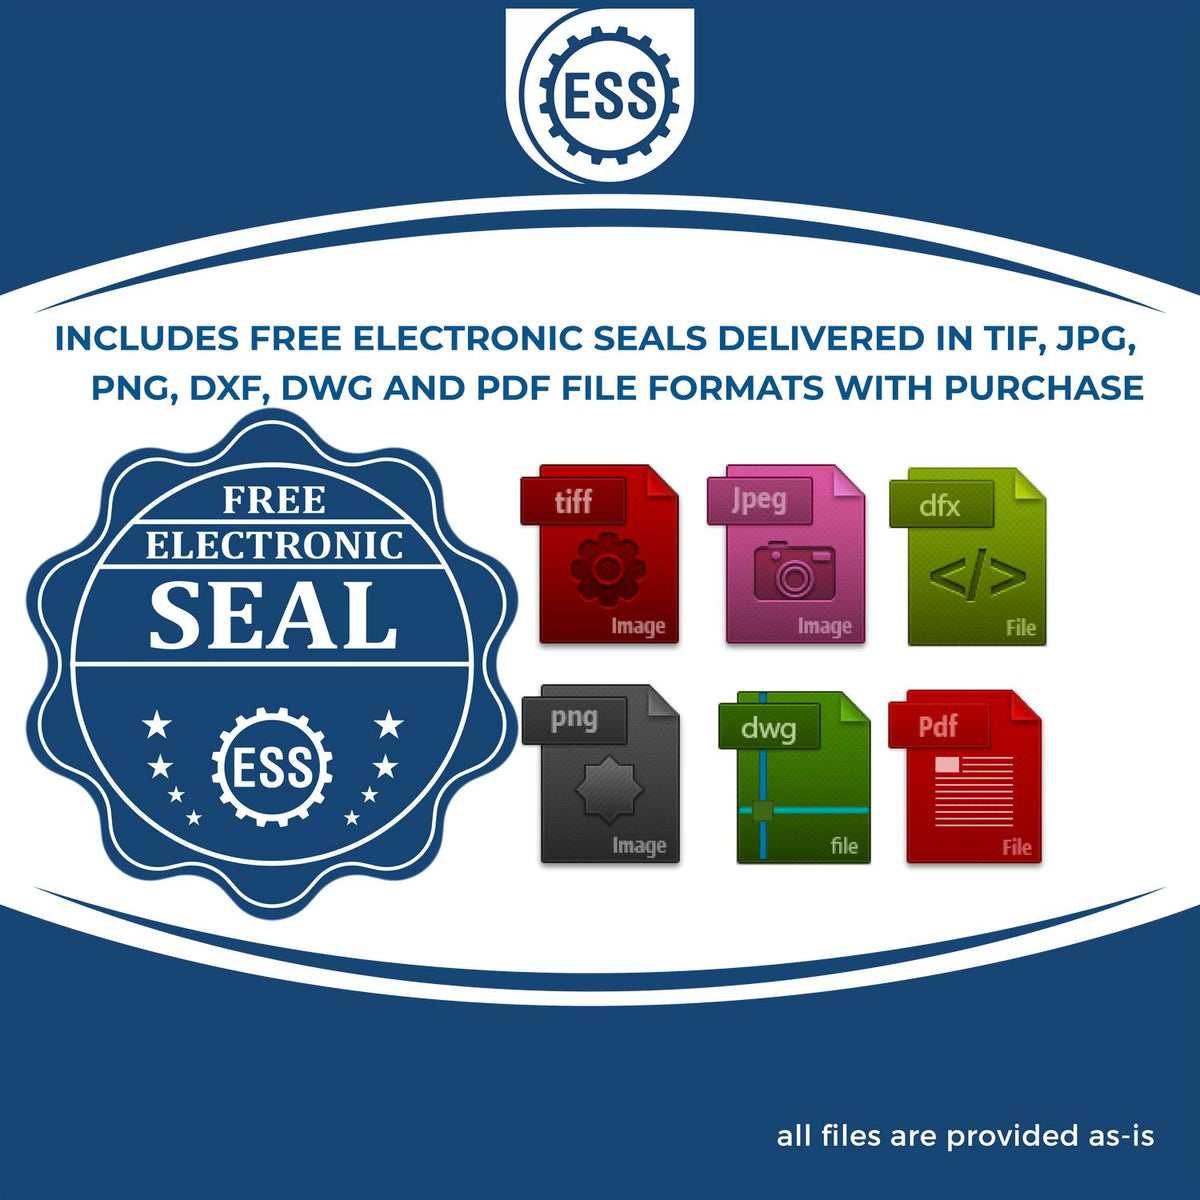 An infographic for the free electronic seal for the PSI New Mexico Notary Stamp illustrating the different file type icons such as DXF, DWG, TIF, JPG and PNG.